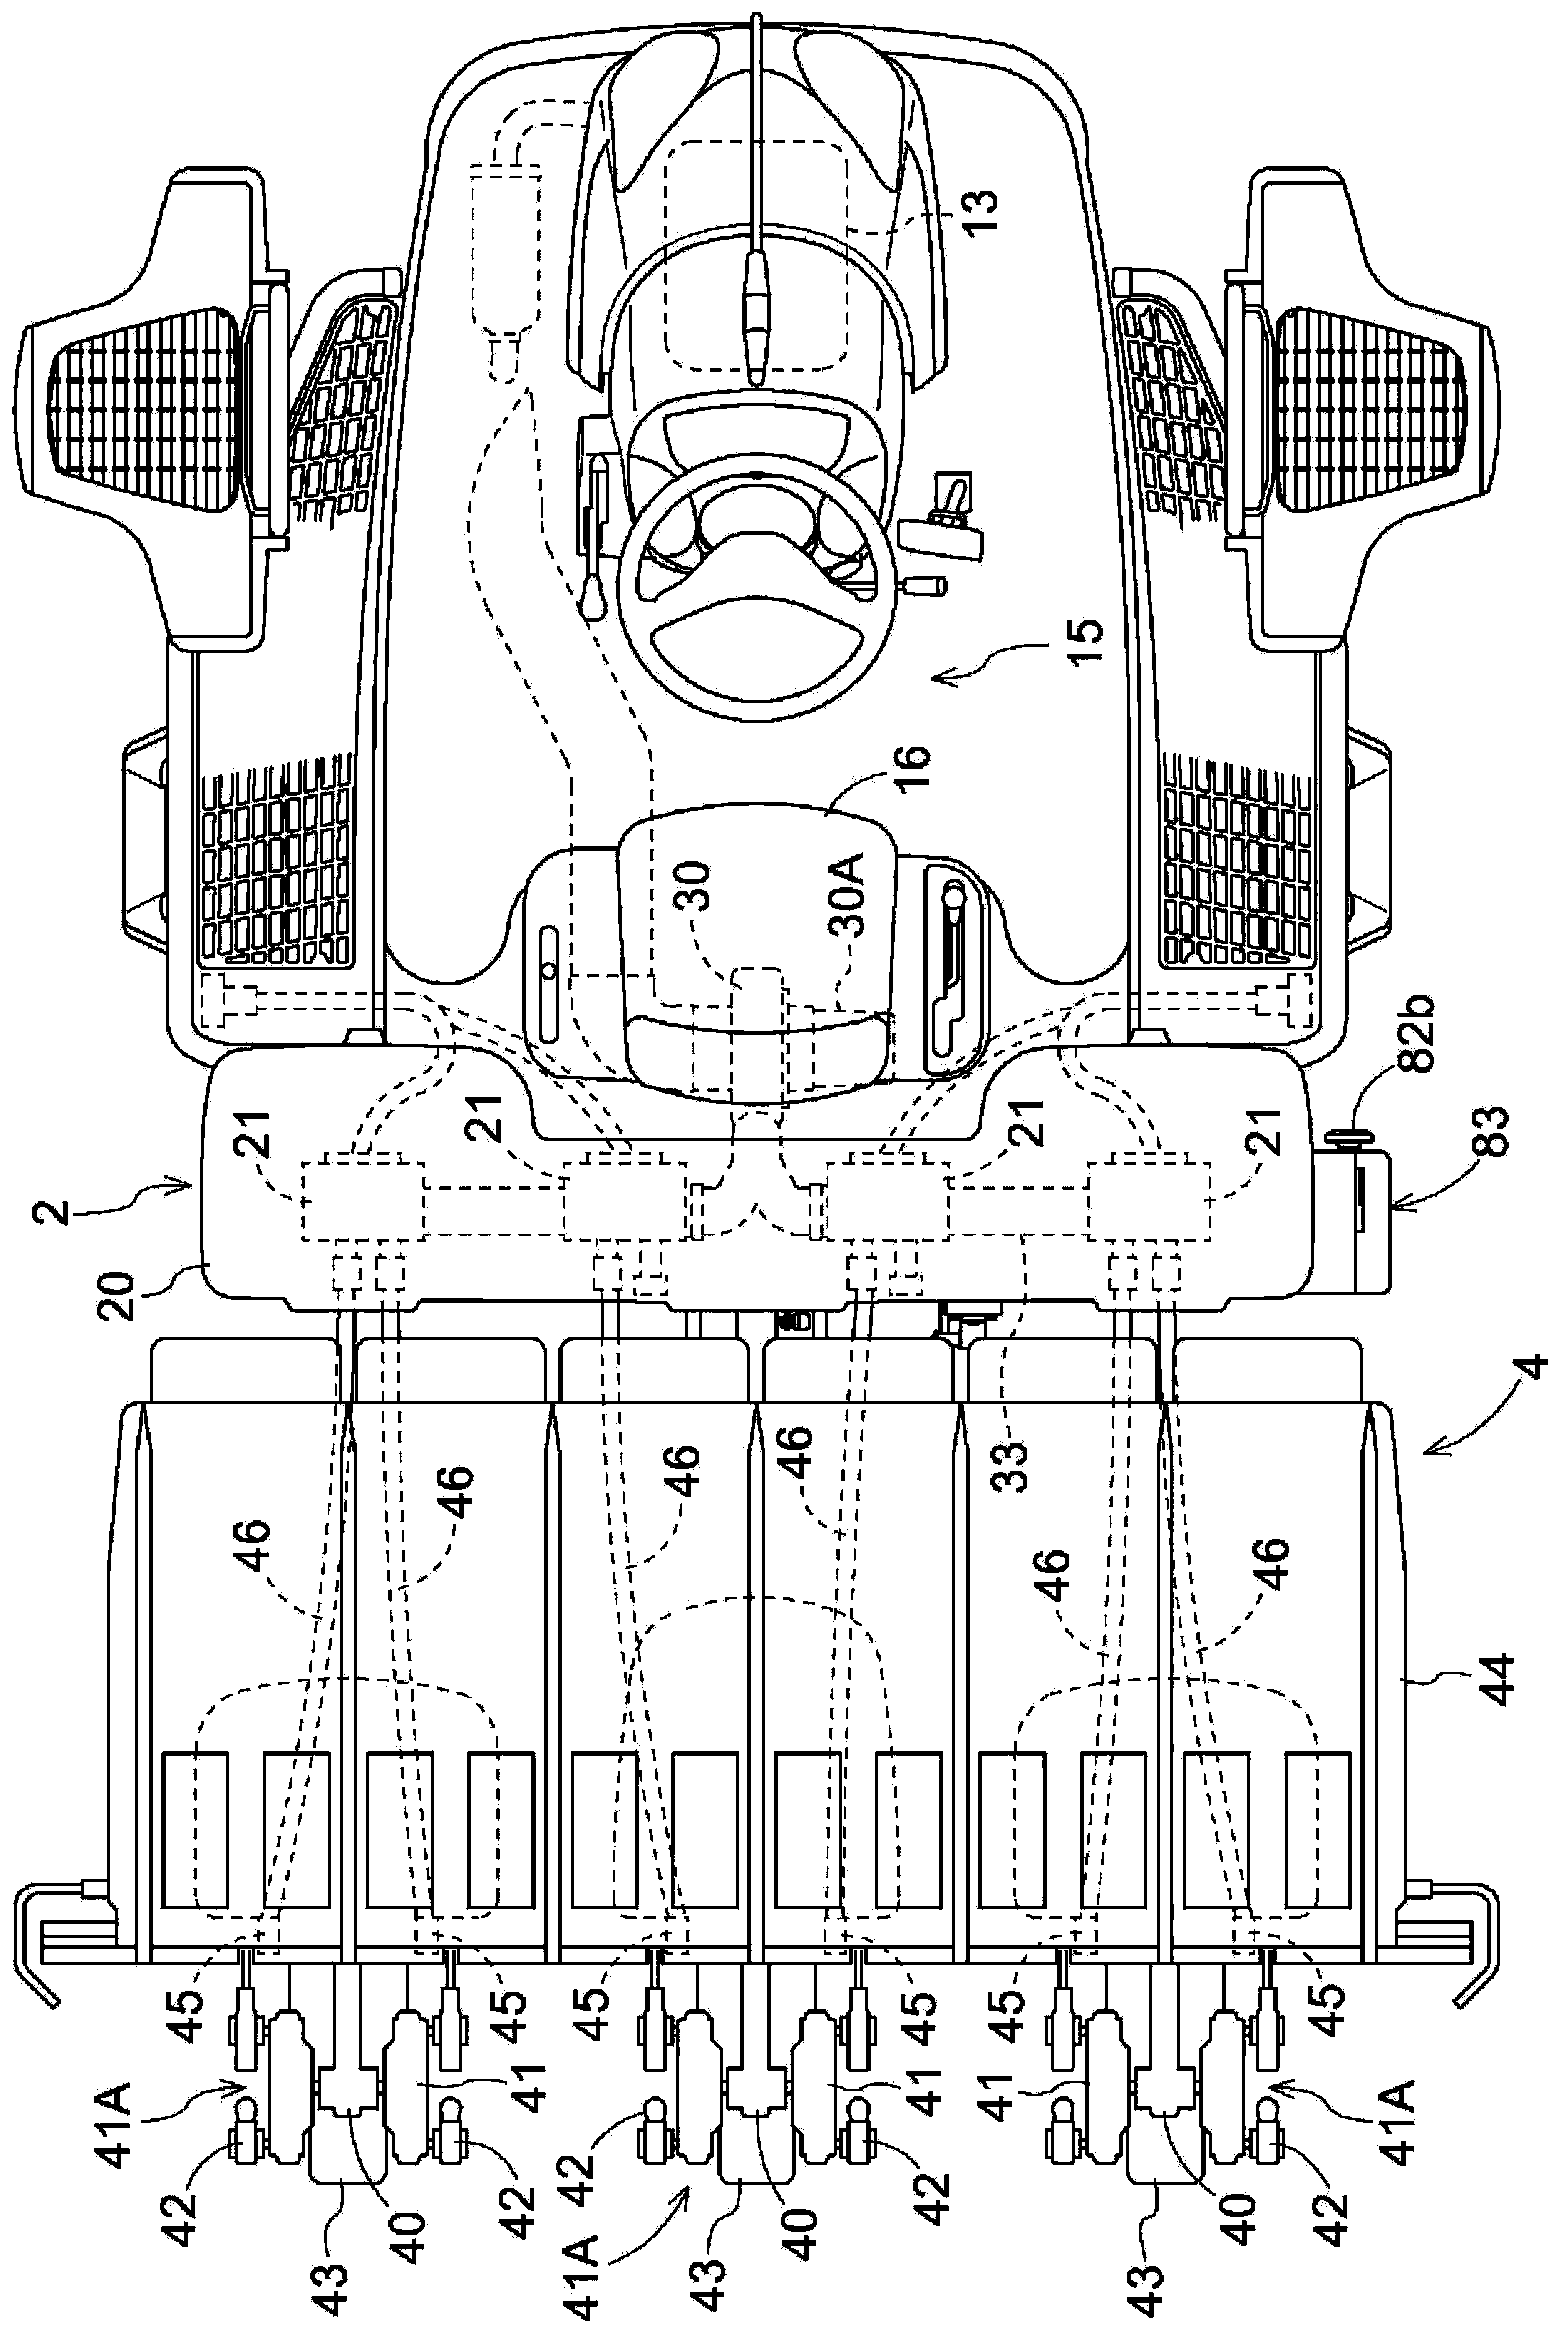 Agricultural material supply device